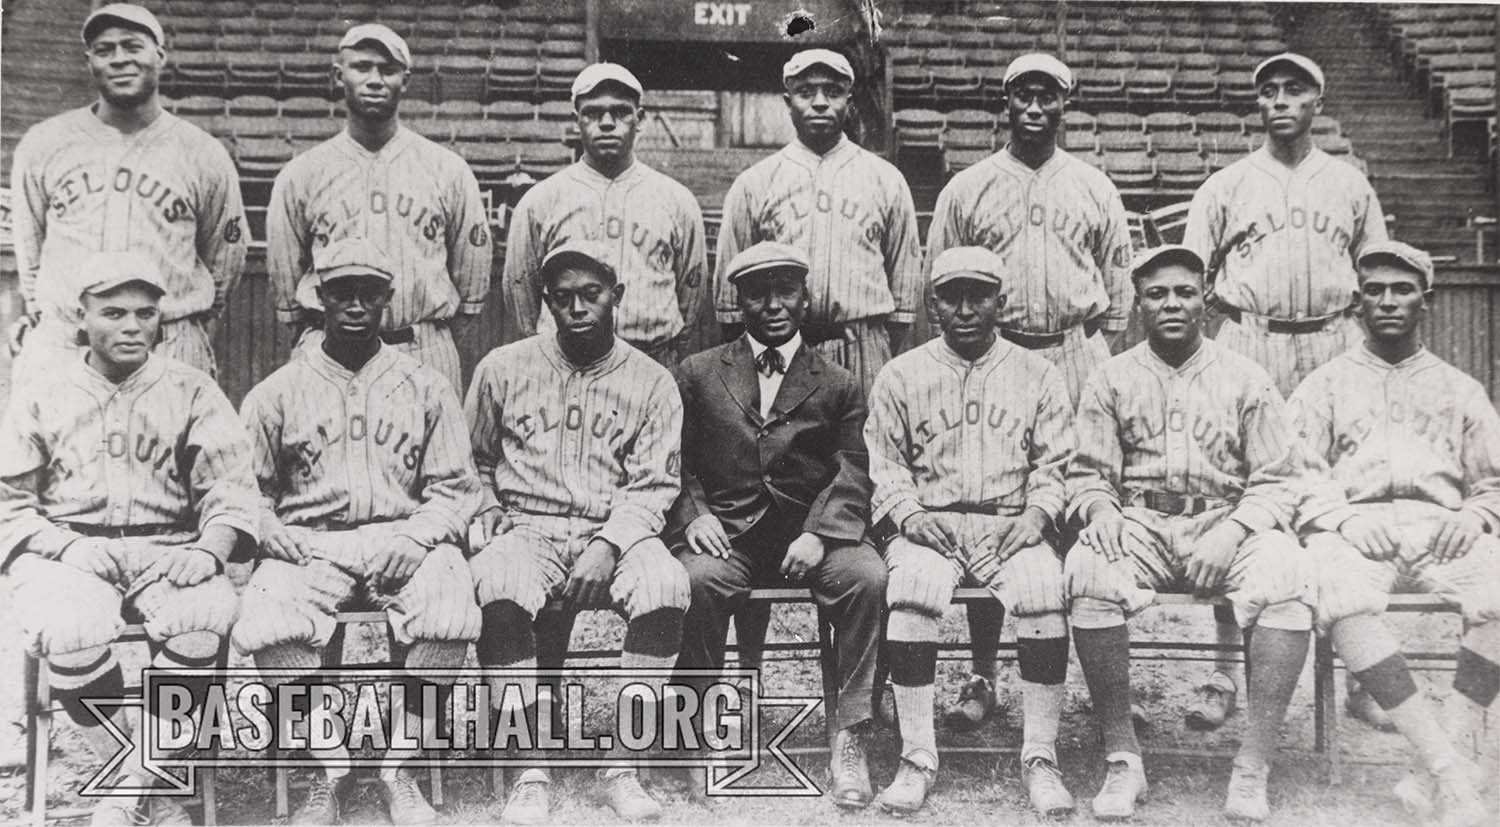 #Shortstops: Words on pictures tell fascinating Negro Leagues story